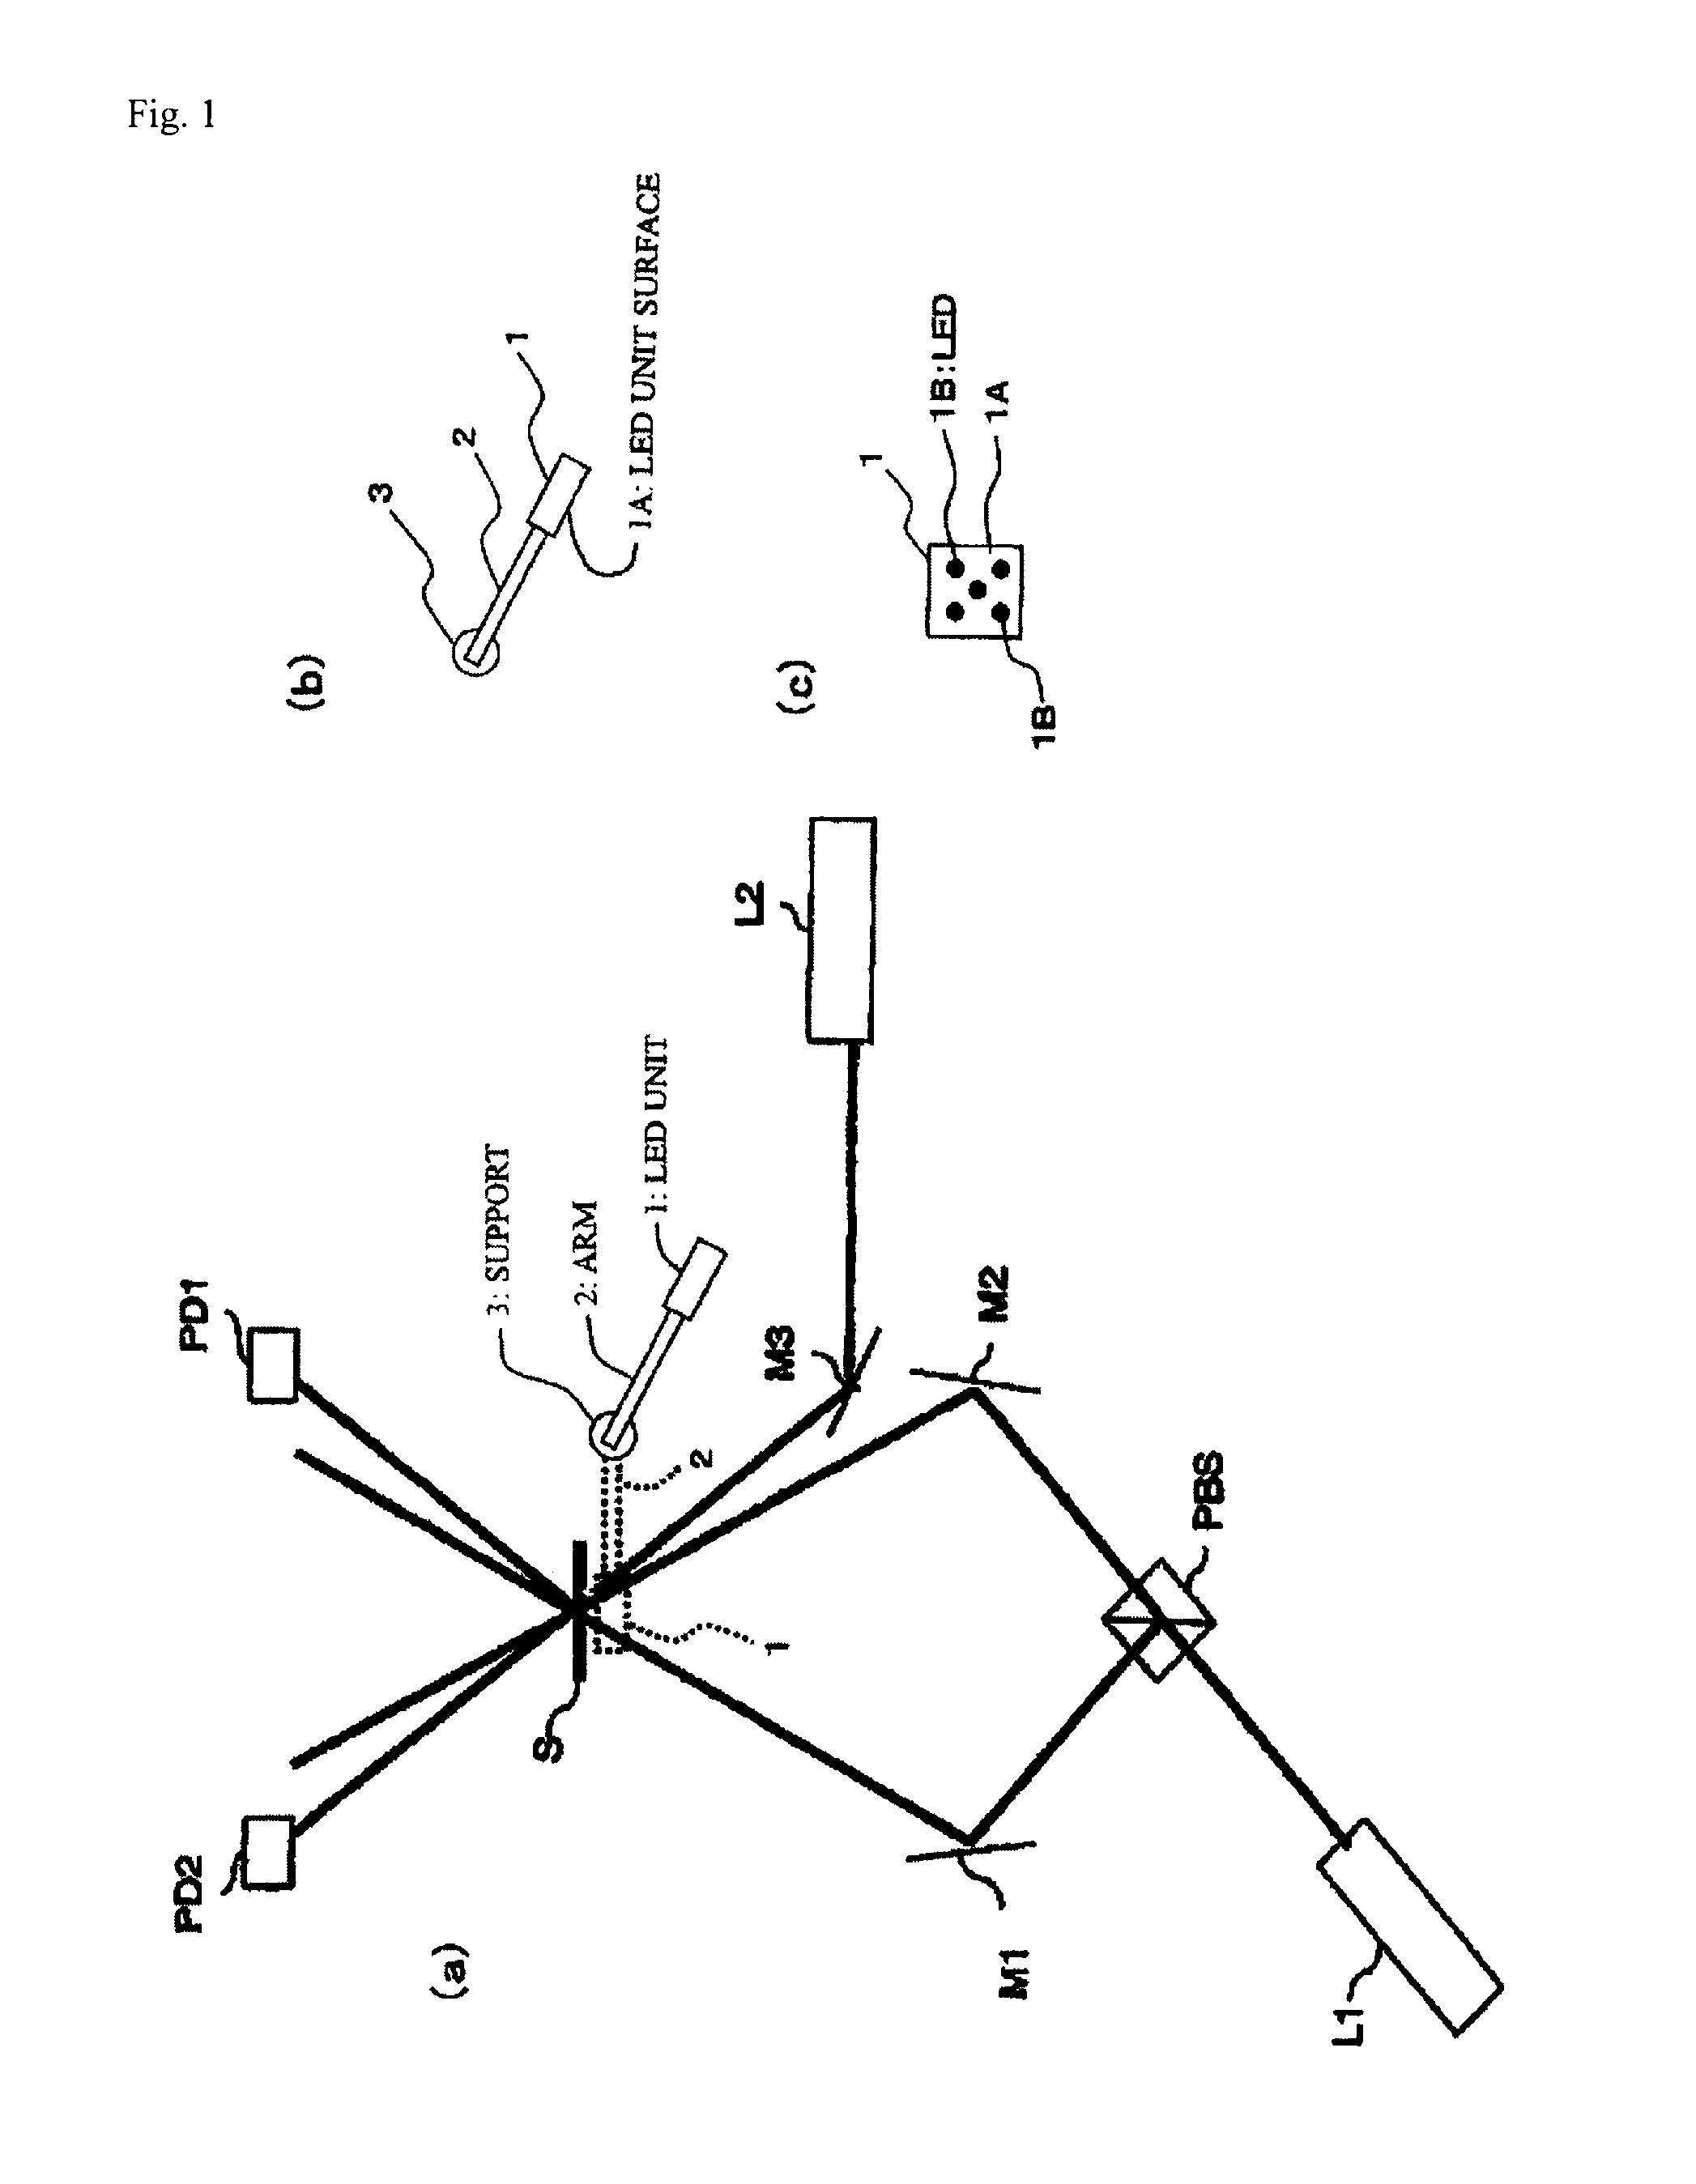 Photoreactive composition, optical material, composition for forming holographic recording layer, holographic recording material, and holographic recording medium